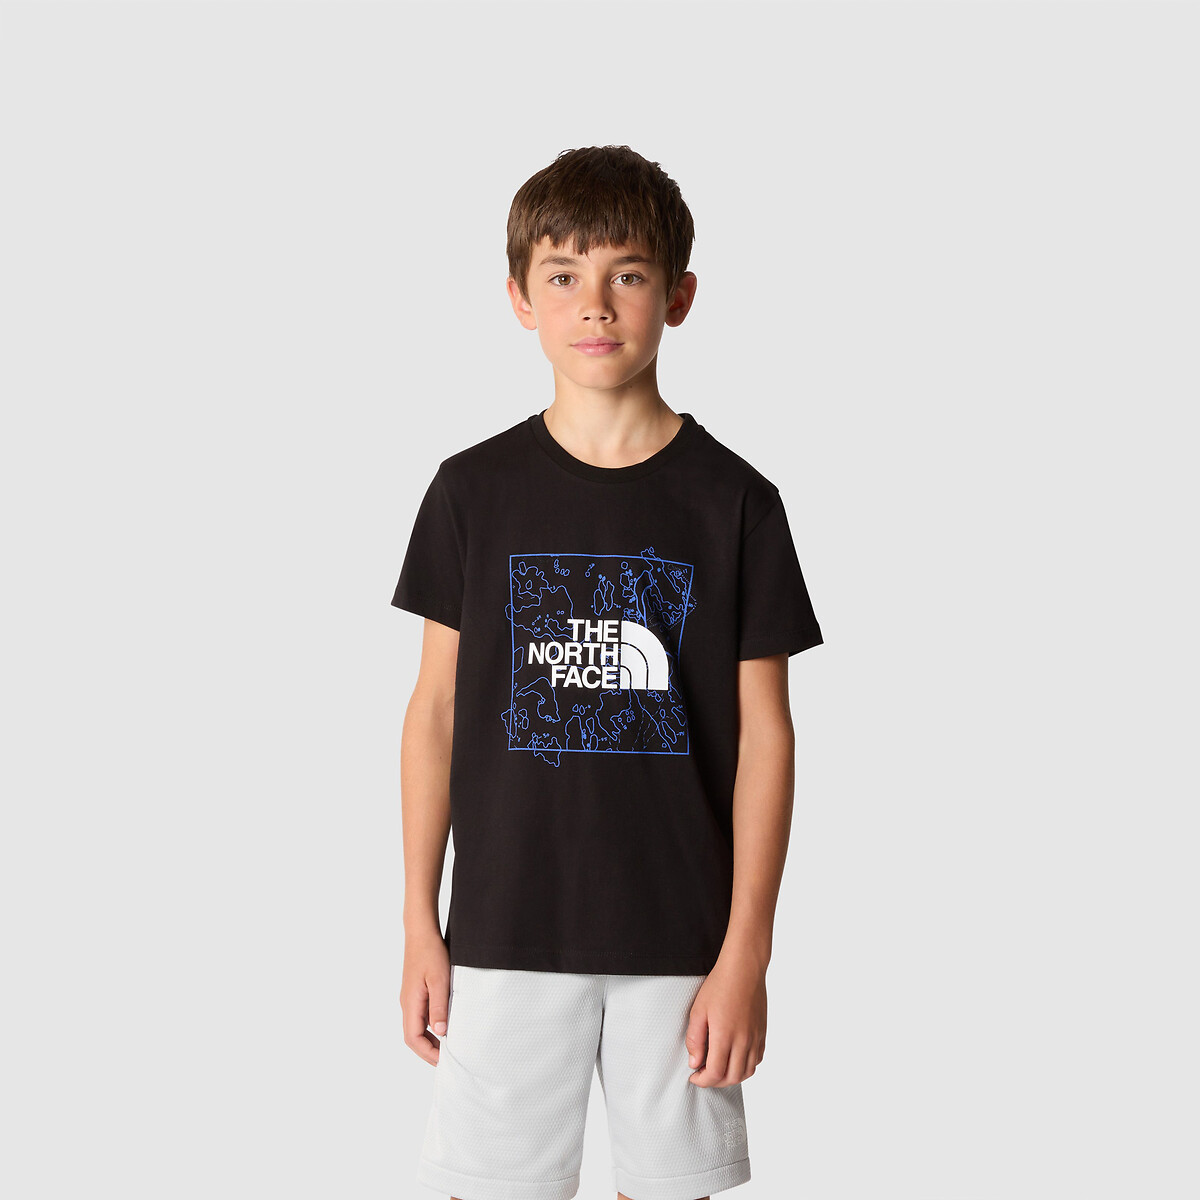 The North Face - Youth's New S/S Graphic Tee - T-Shirt